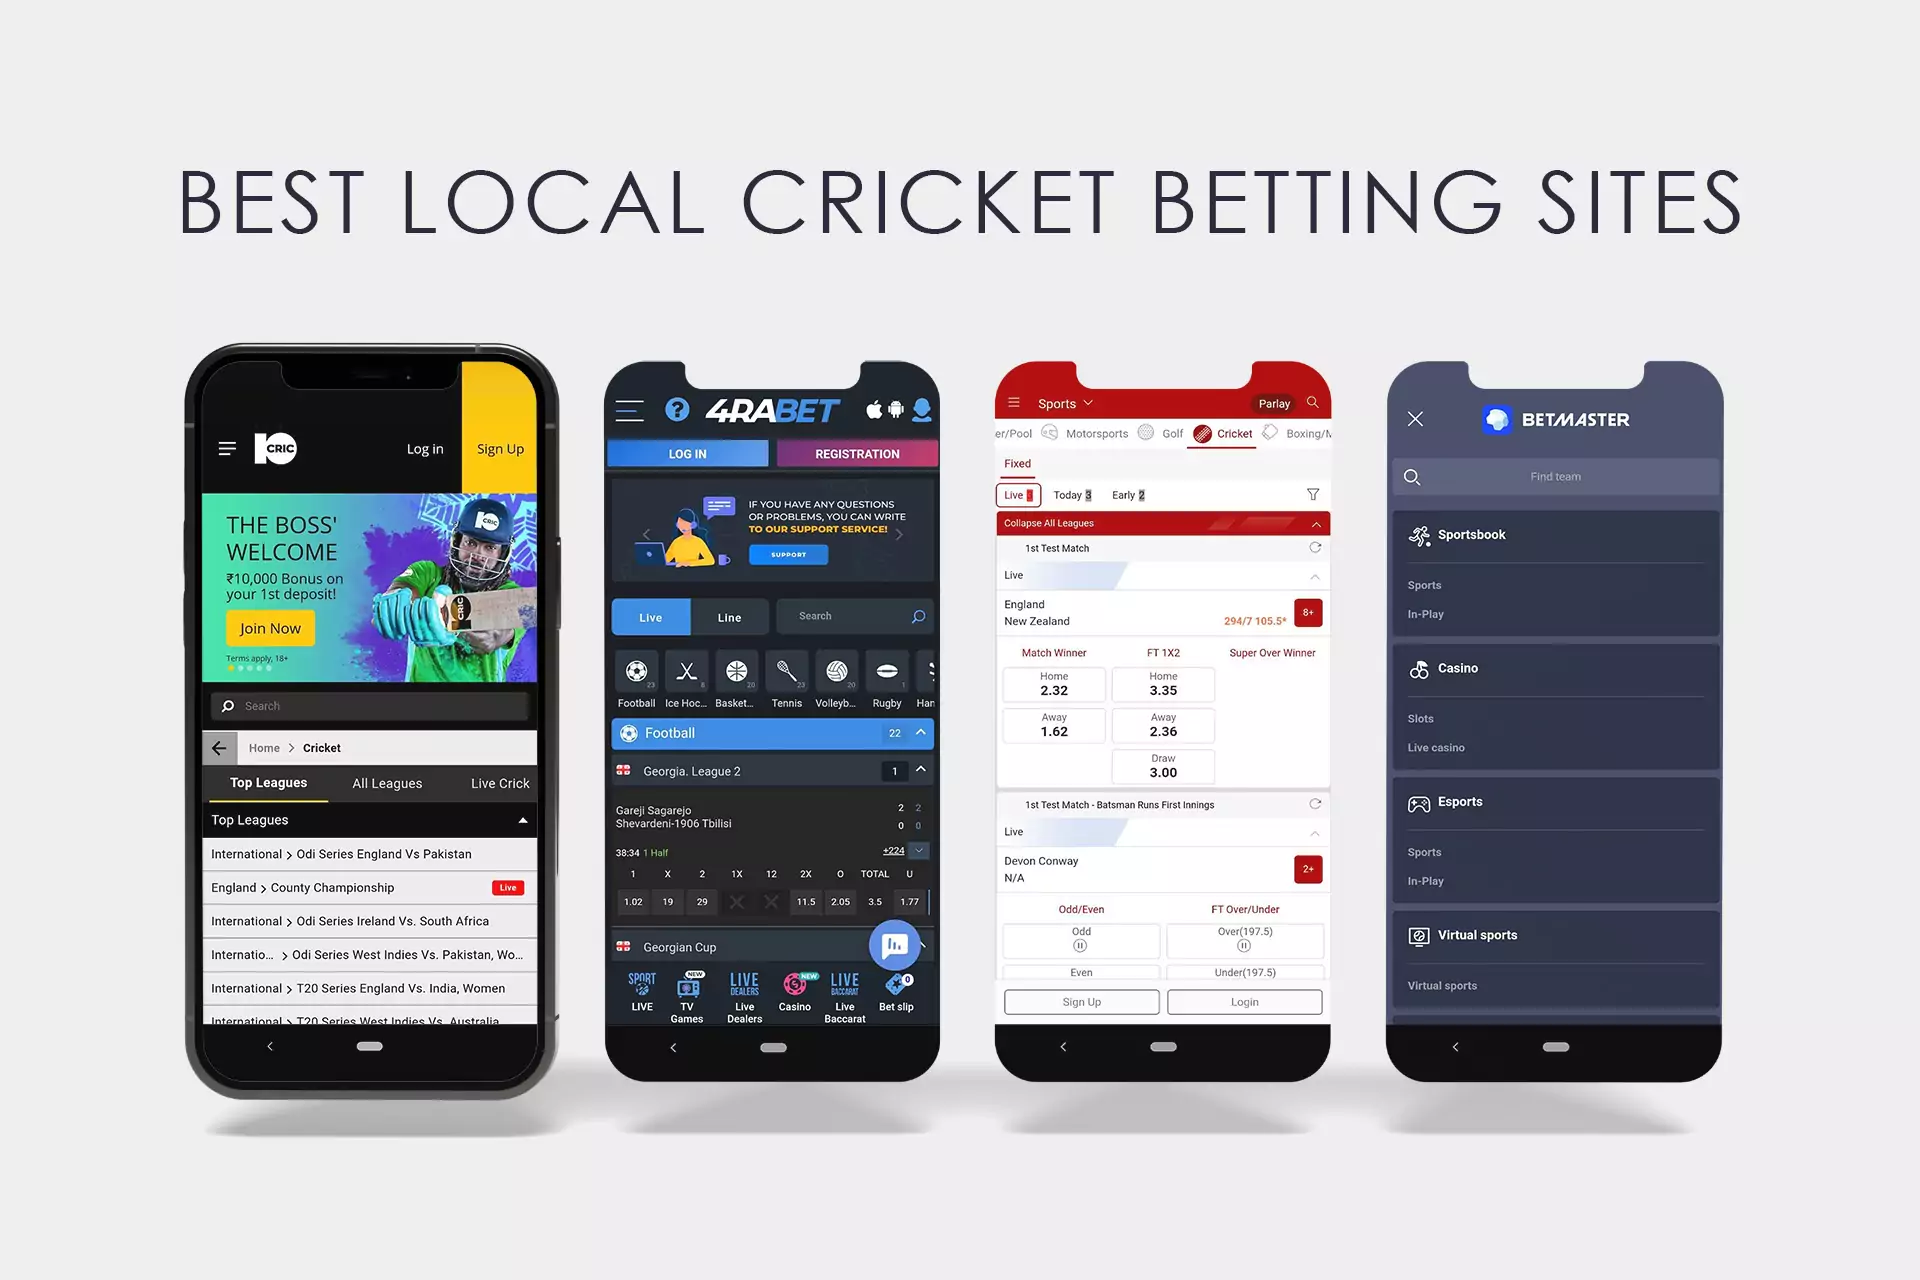 Our experts have highlighted the best local Indian betting sites.